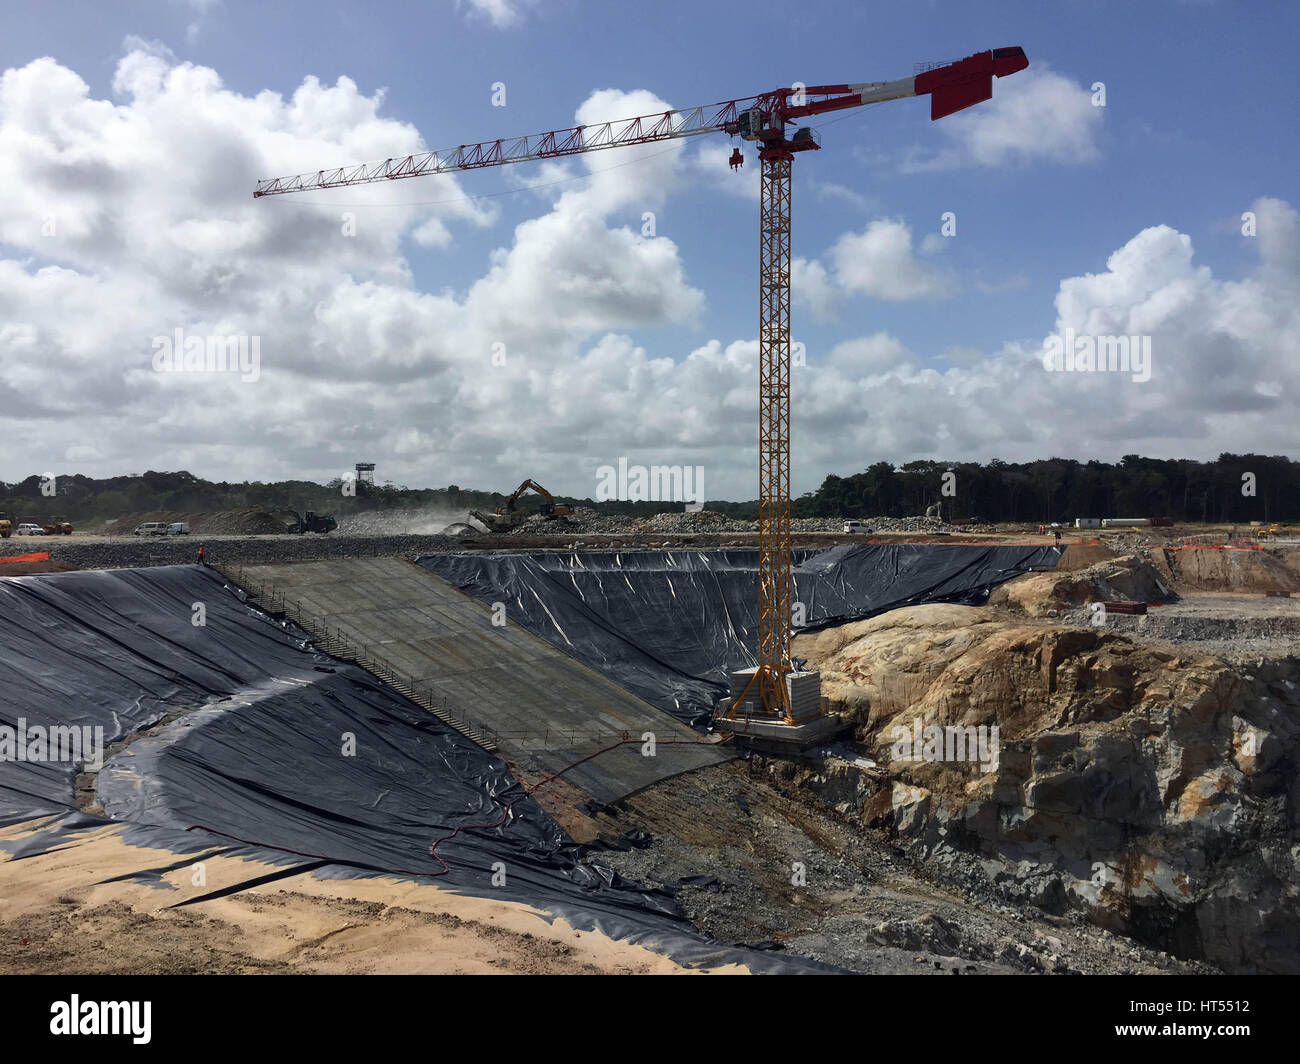 Launch pad under construction where the European Space Agency's next generation heavy lift rocket Ariane 6 will blast into space from Kourou, French Guiana, in 2020. Stock Photo